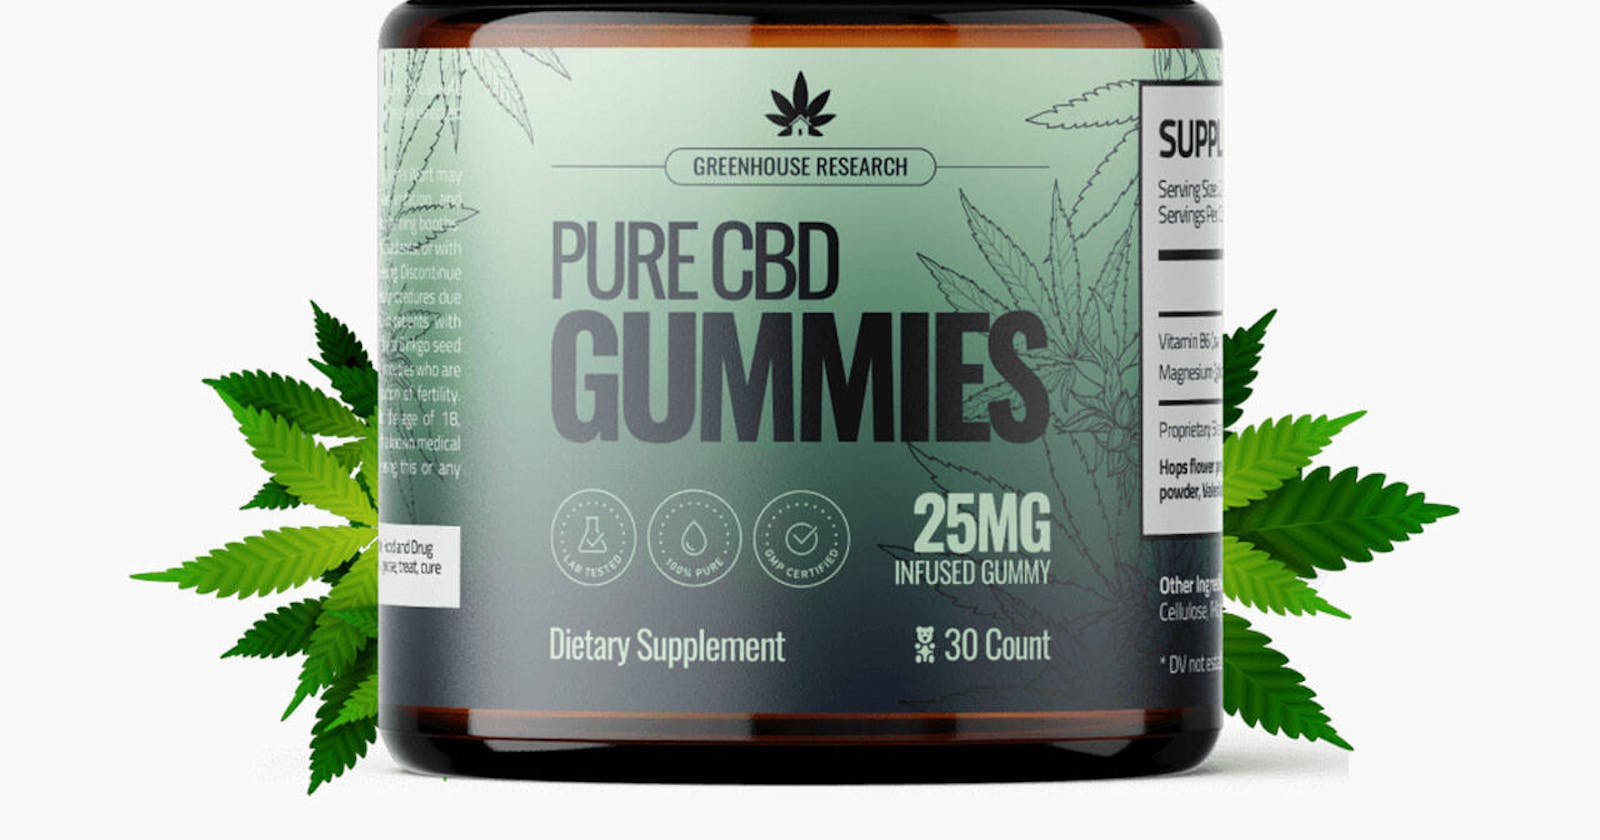 Say Goodbye to Dementia-Related Anxiety and Depression with Musk's CBD Gummies